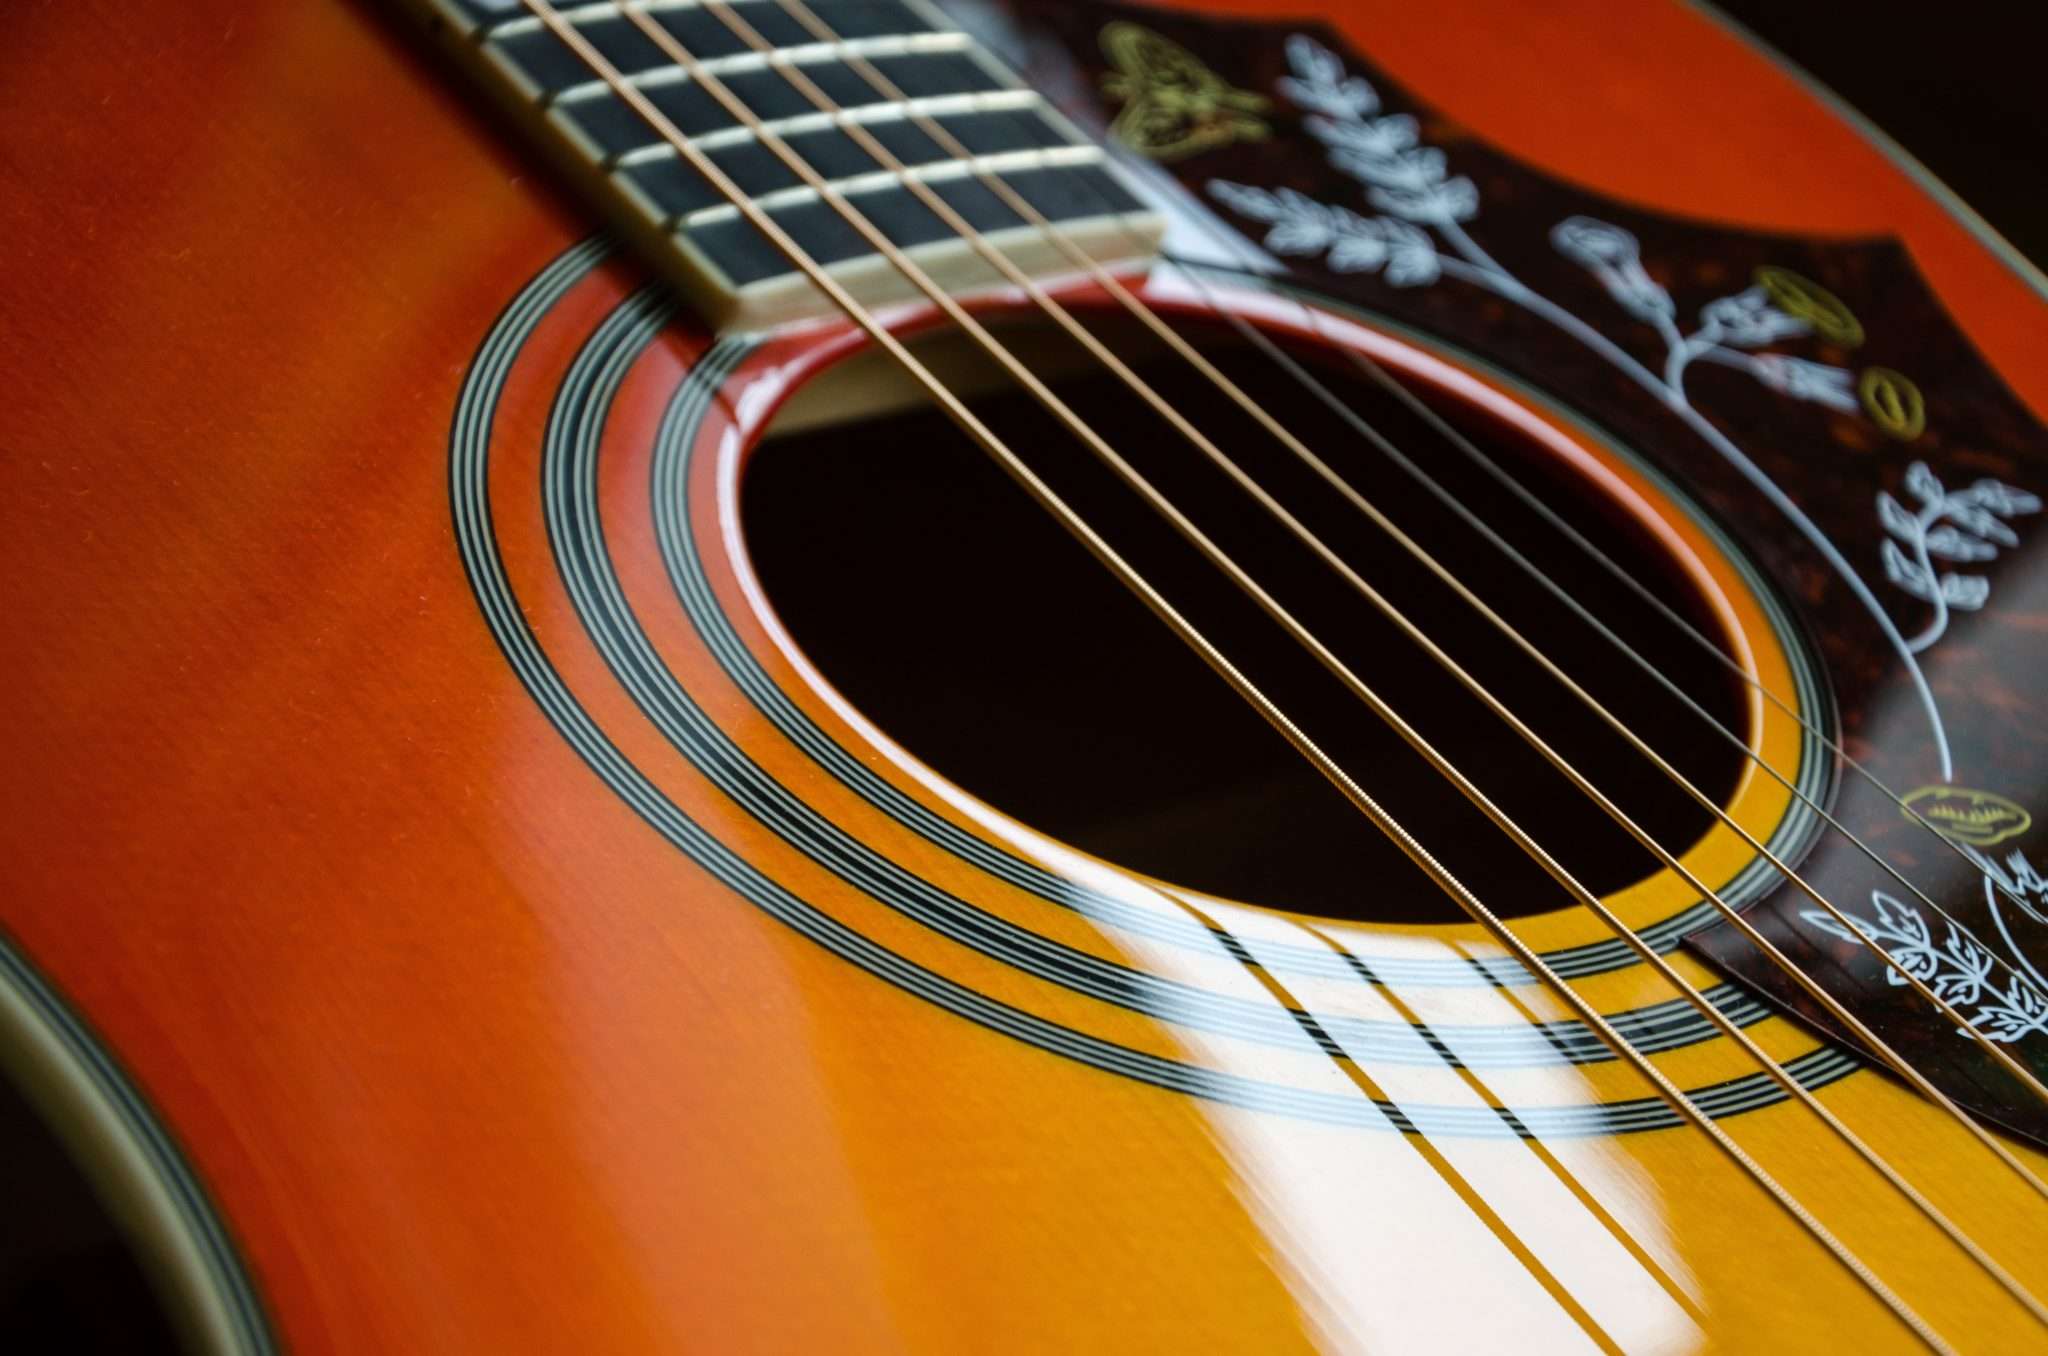 How to adjust the action on an acoustic guitar 2020